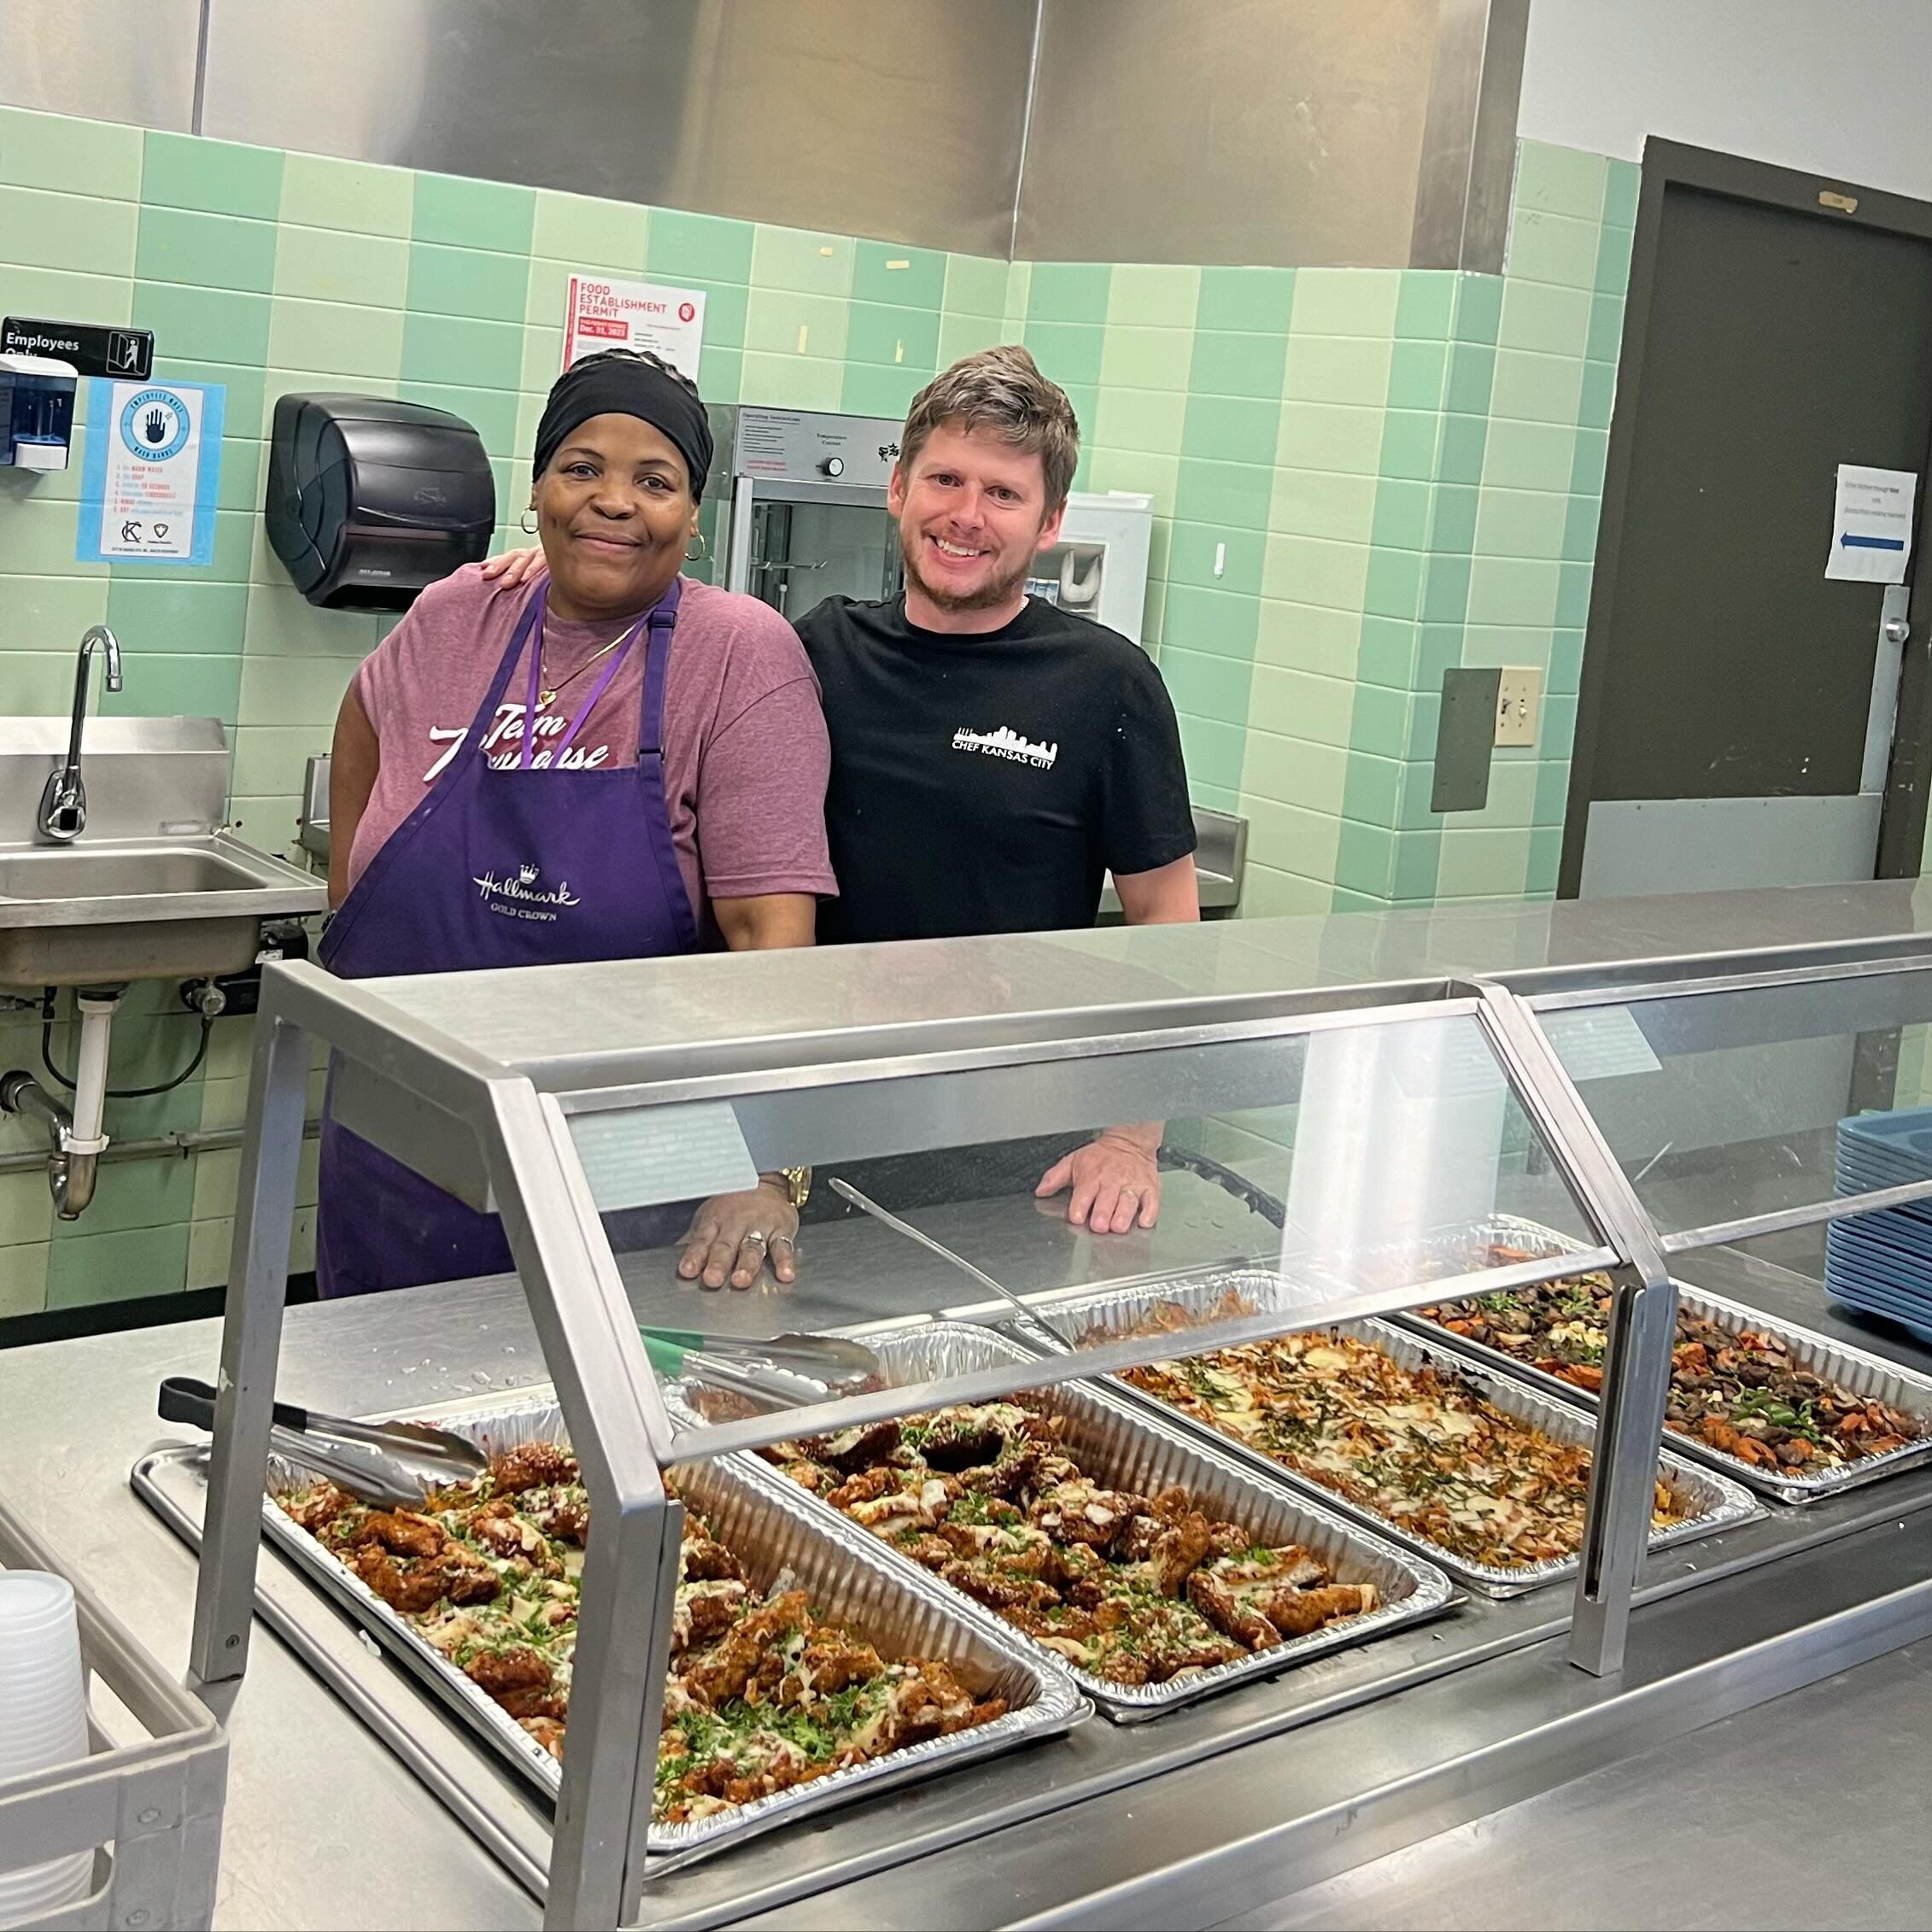 Had an amazing experience on Friday cooking lunch for the families @newhouse_kc. It was an honor to be able to help out with such a special cause. #givingback #communityservice